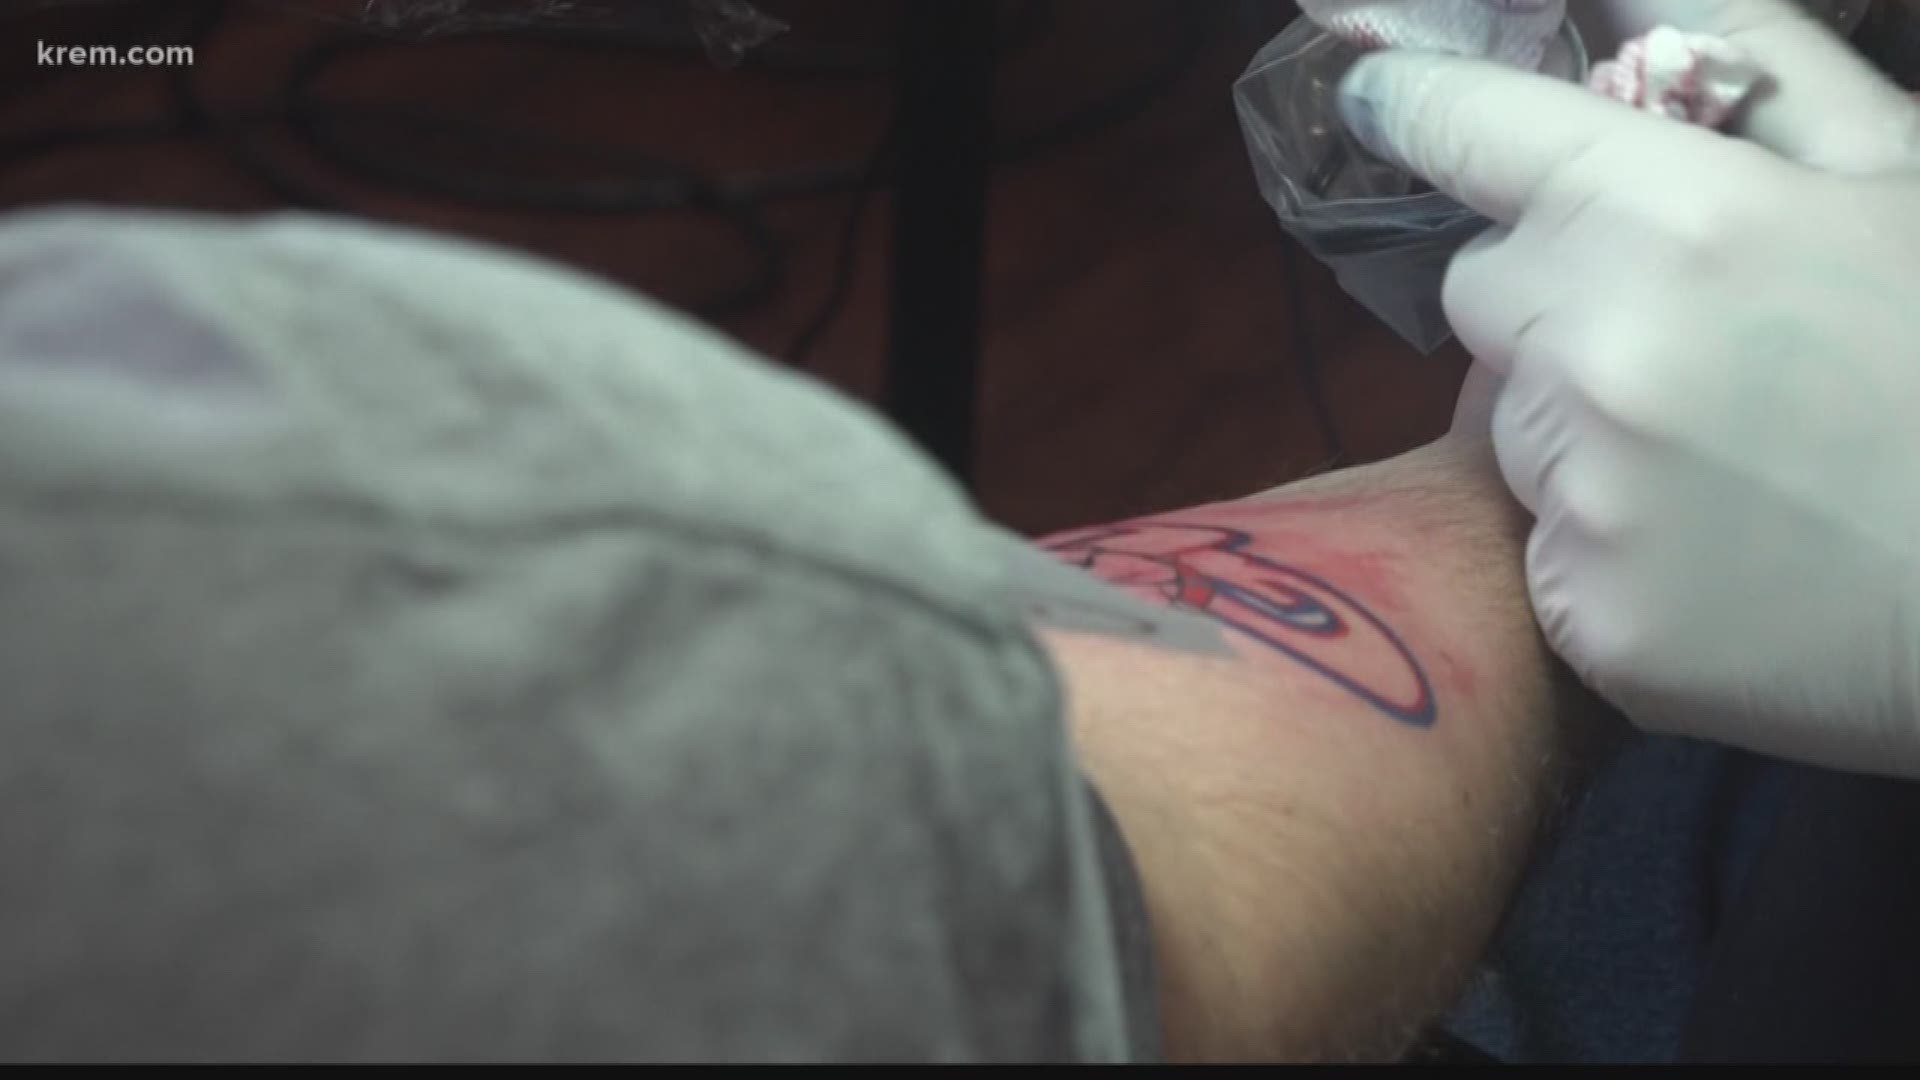 Local man helps the homeless with his first Zags tattoo (3-20-18)